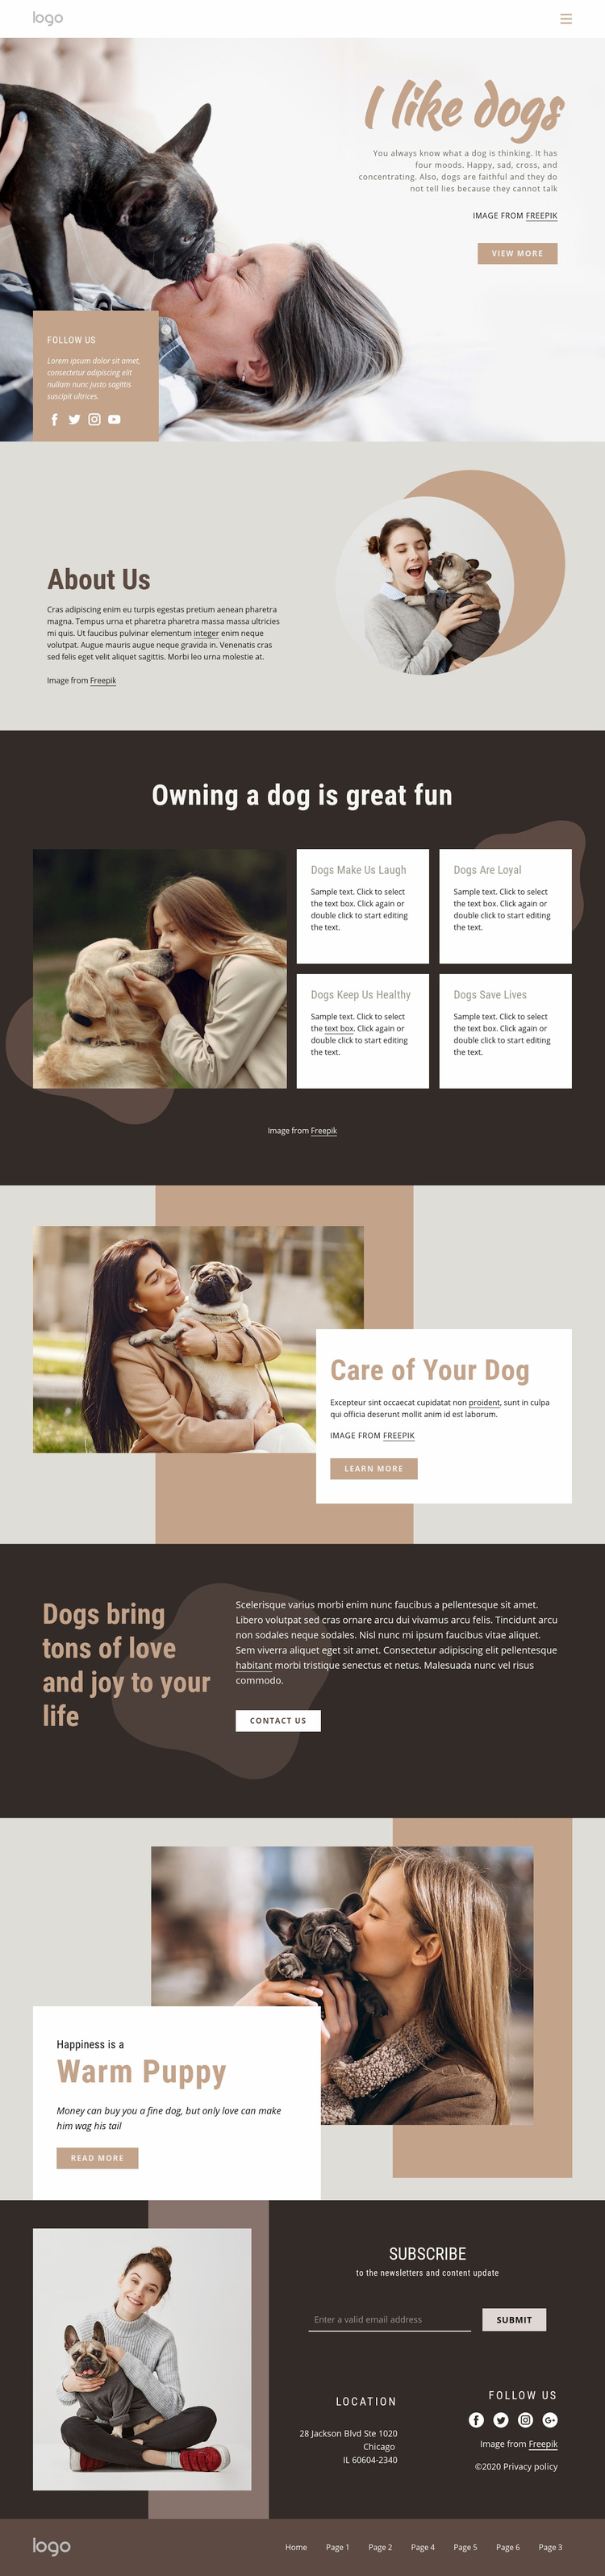 All about dogs Squarespace Template Alternative